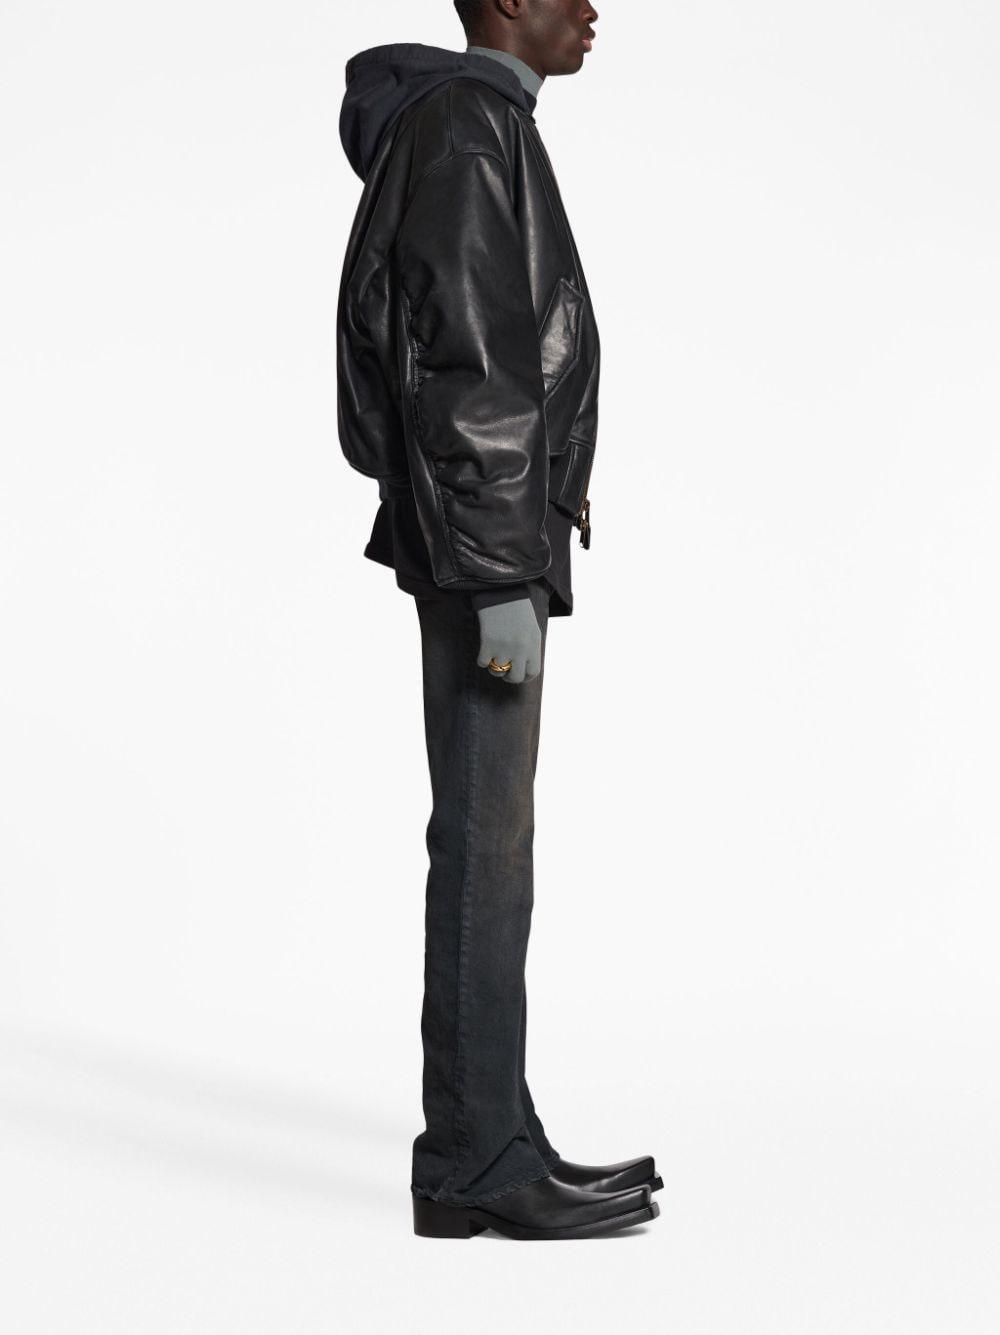 Balenciaga Hooded Leather Bomber Jacket in Black | Lyst